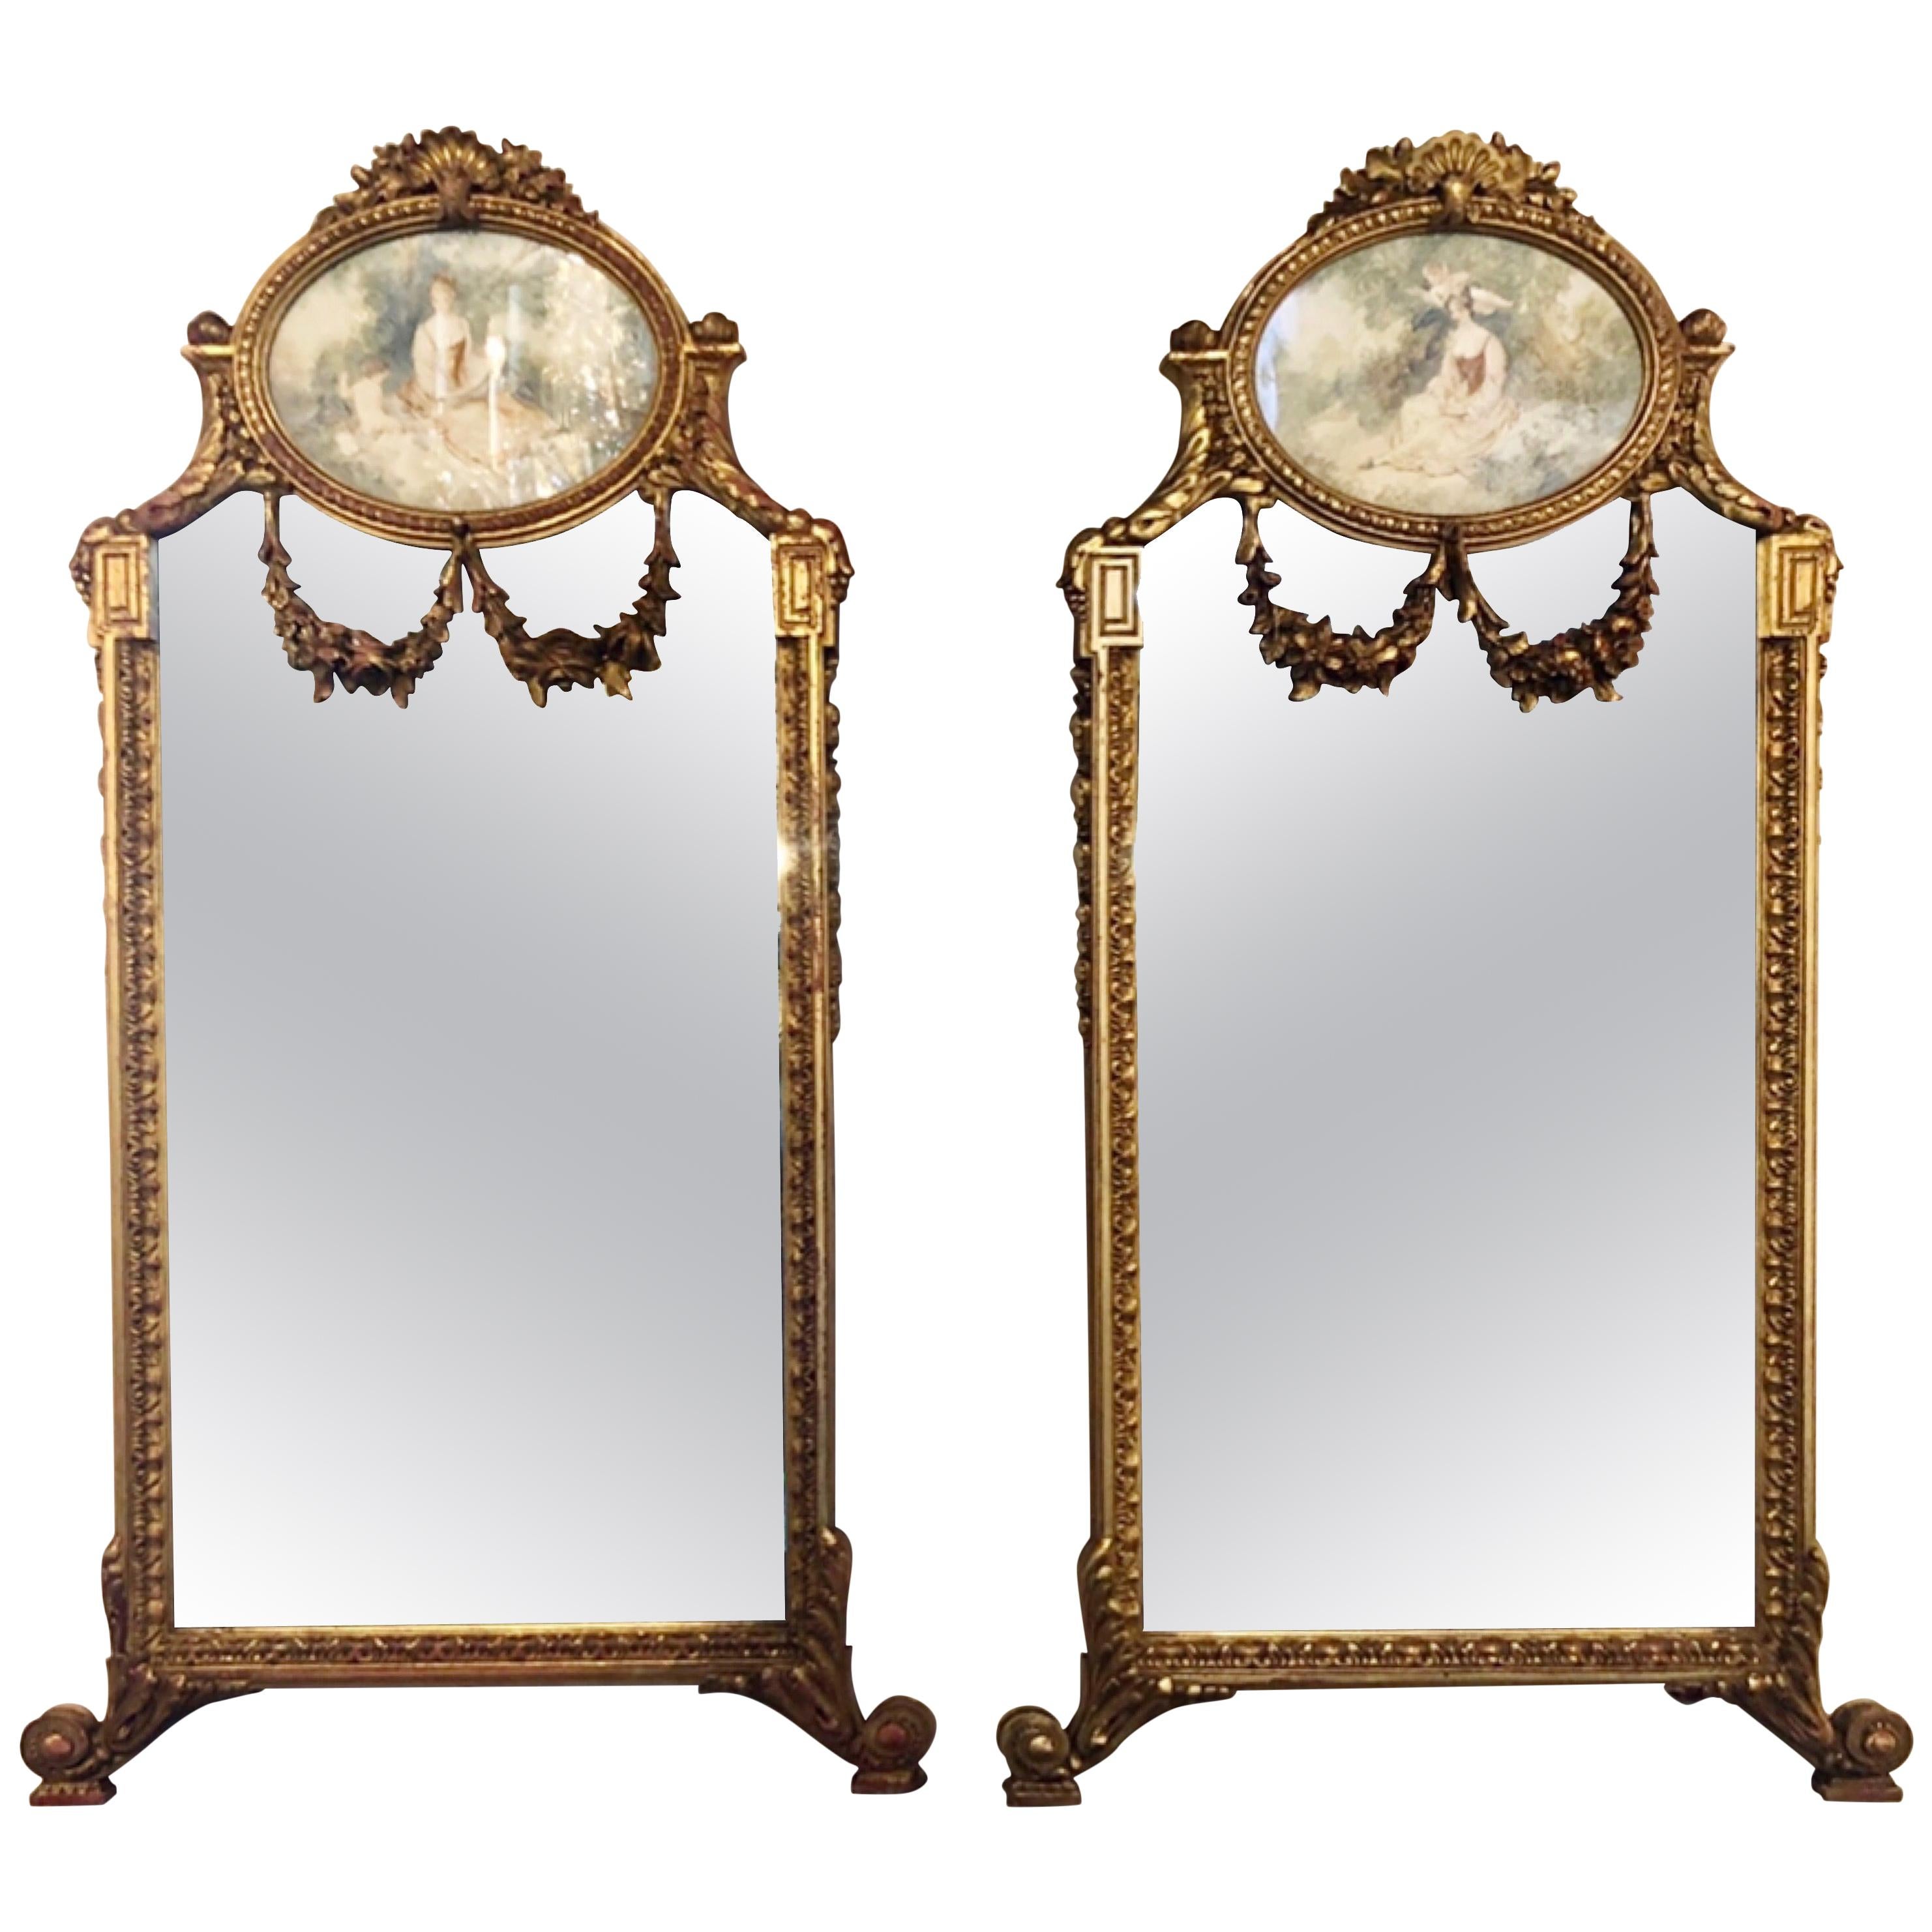 Pair of Wall or Console Mirrors, Italian Trumeau Form